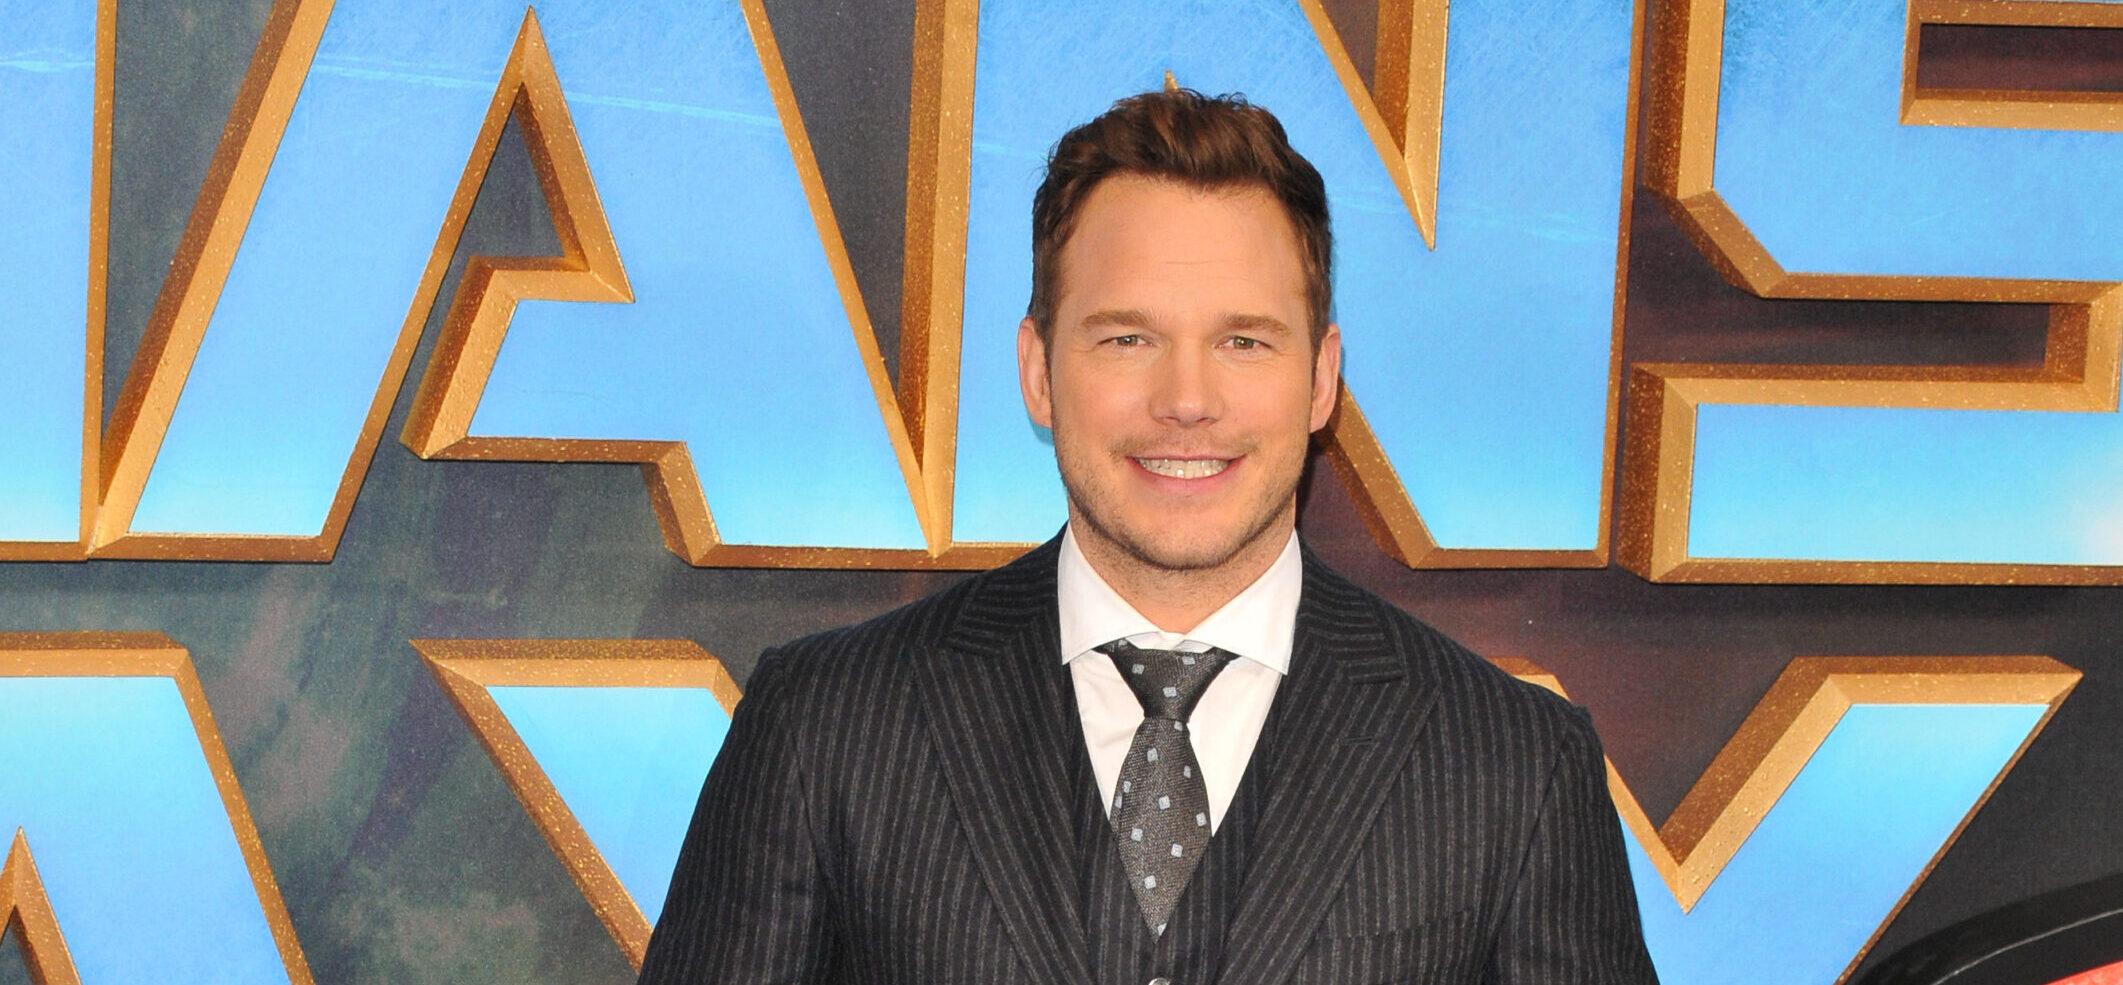 Chris Pratt’s Controversial Ranking Of ‘Guardians Of The Galaxy’ Songs